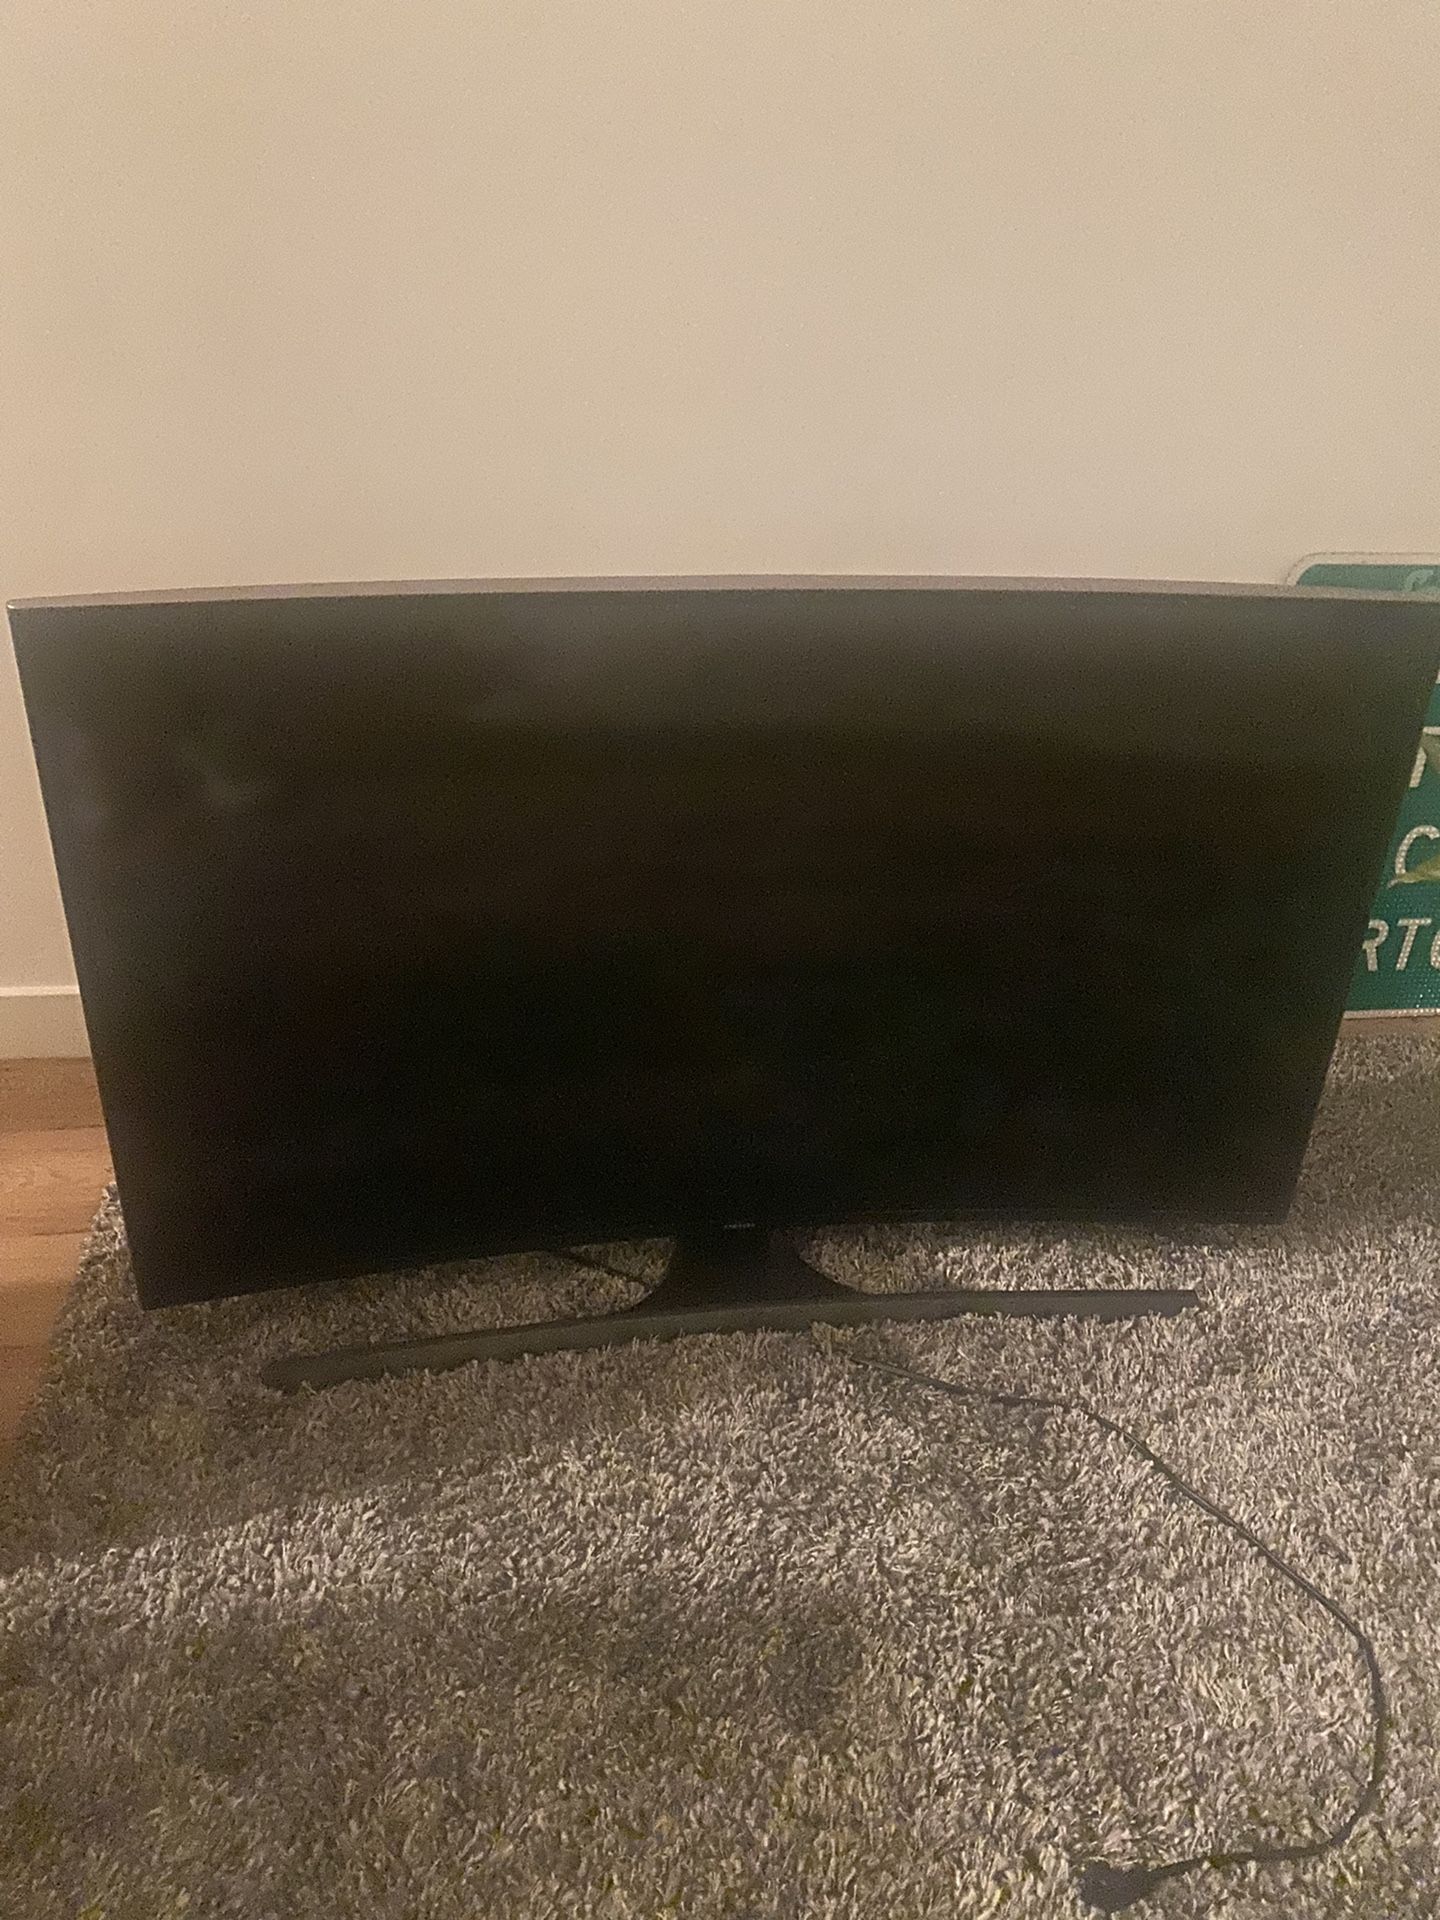 Samsung 55 Inch Curved Tv